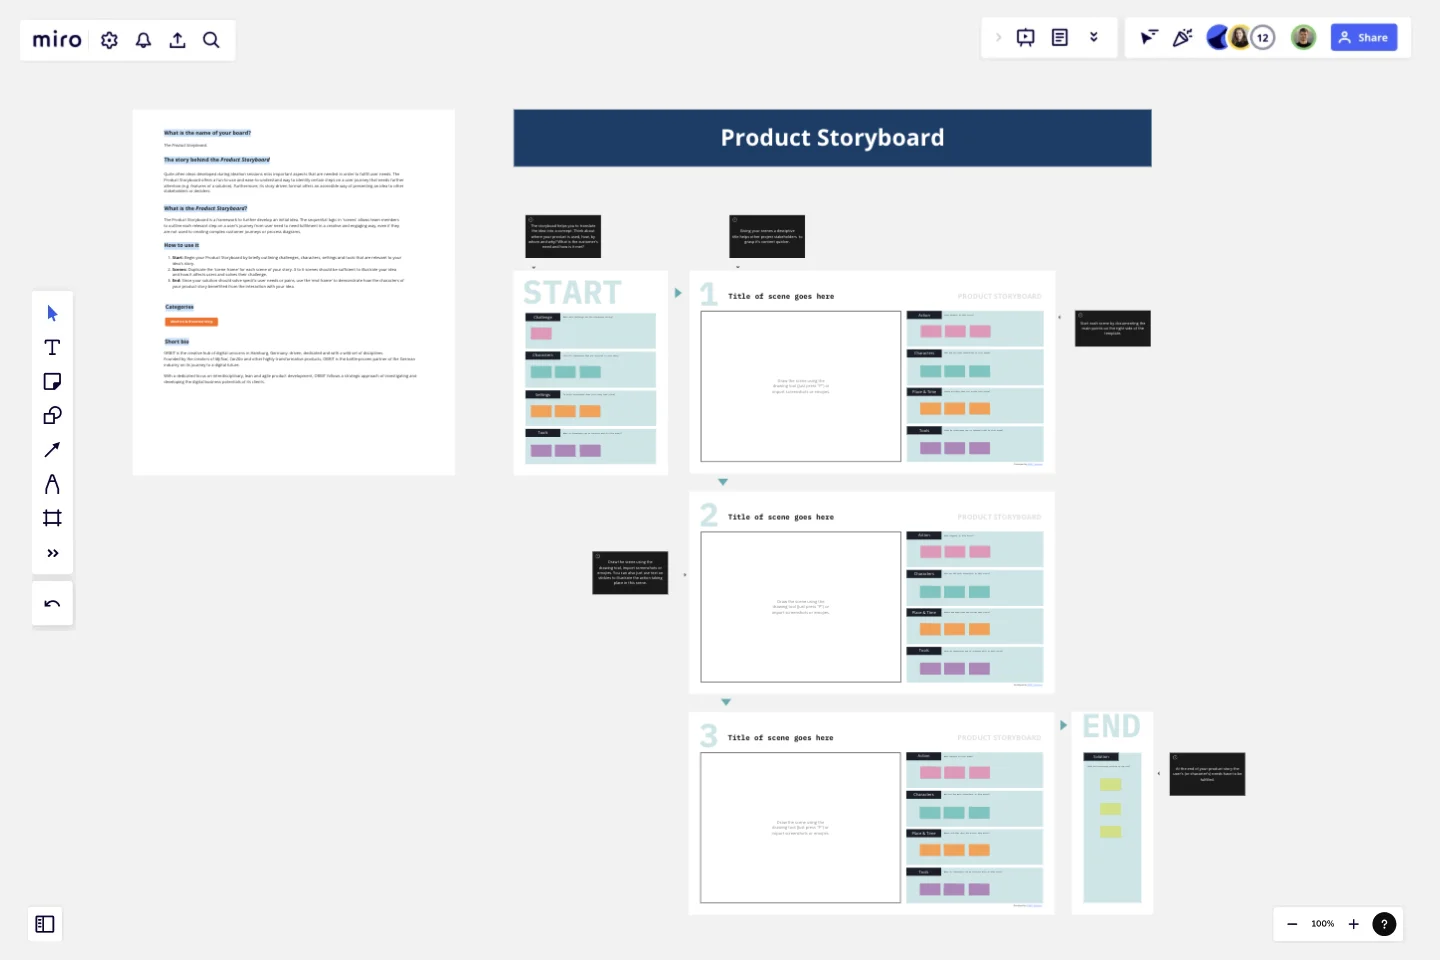 The Product Storyboard template